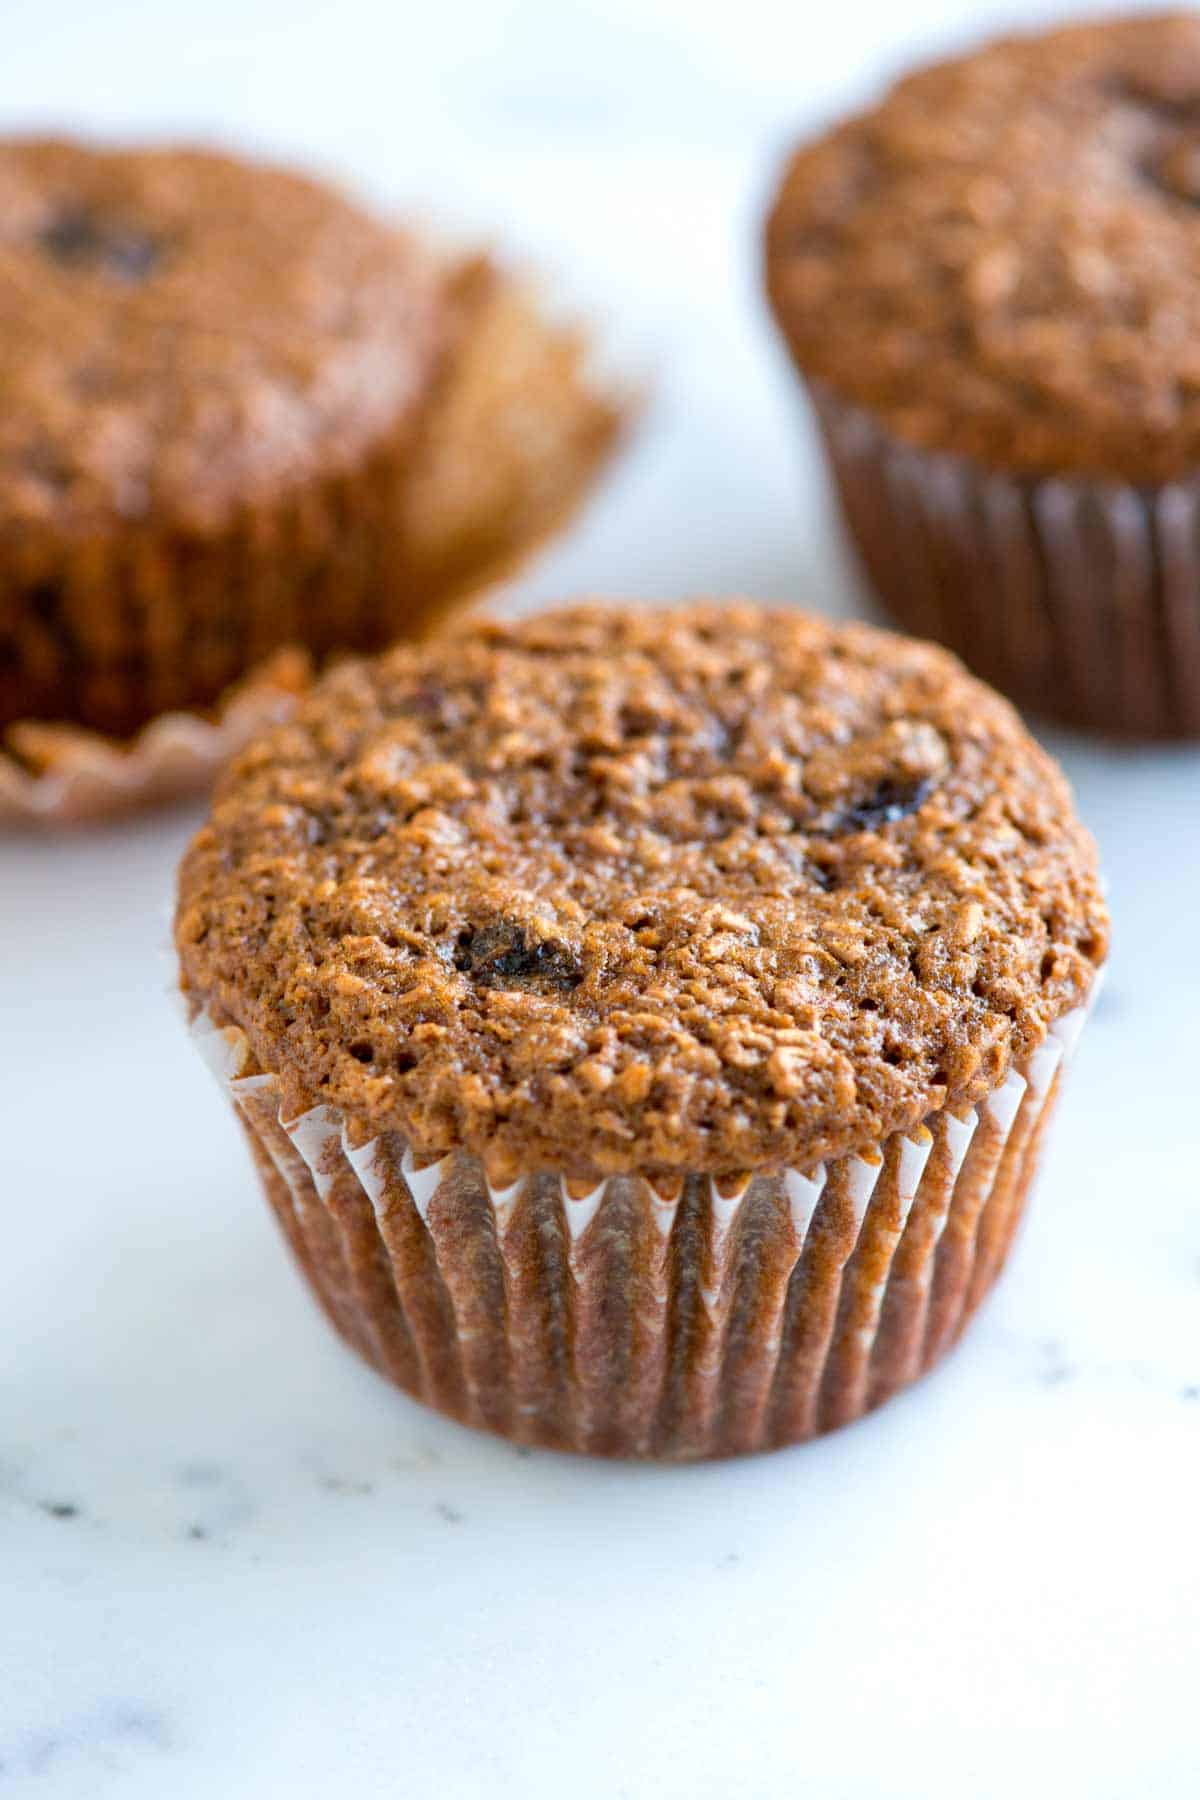 How Many Calories in a Bran Muffin 